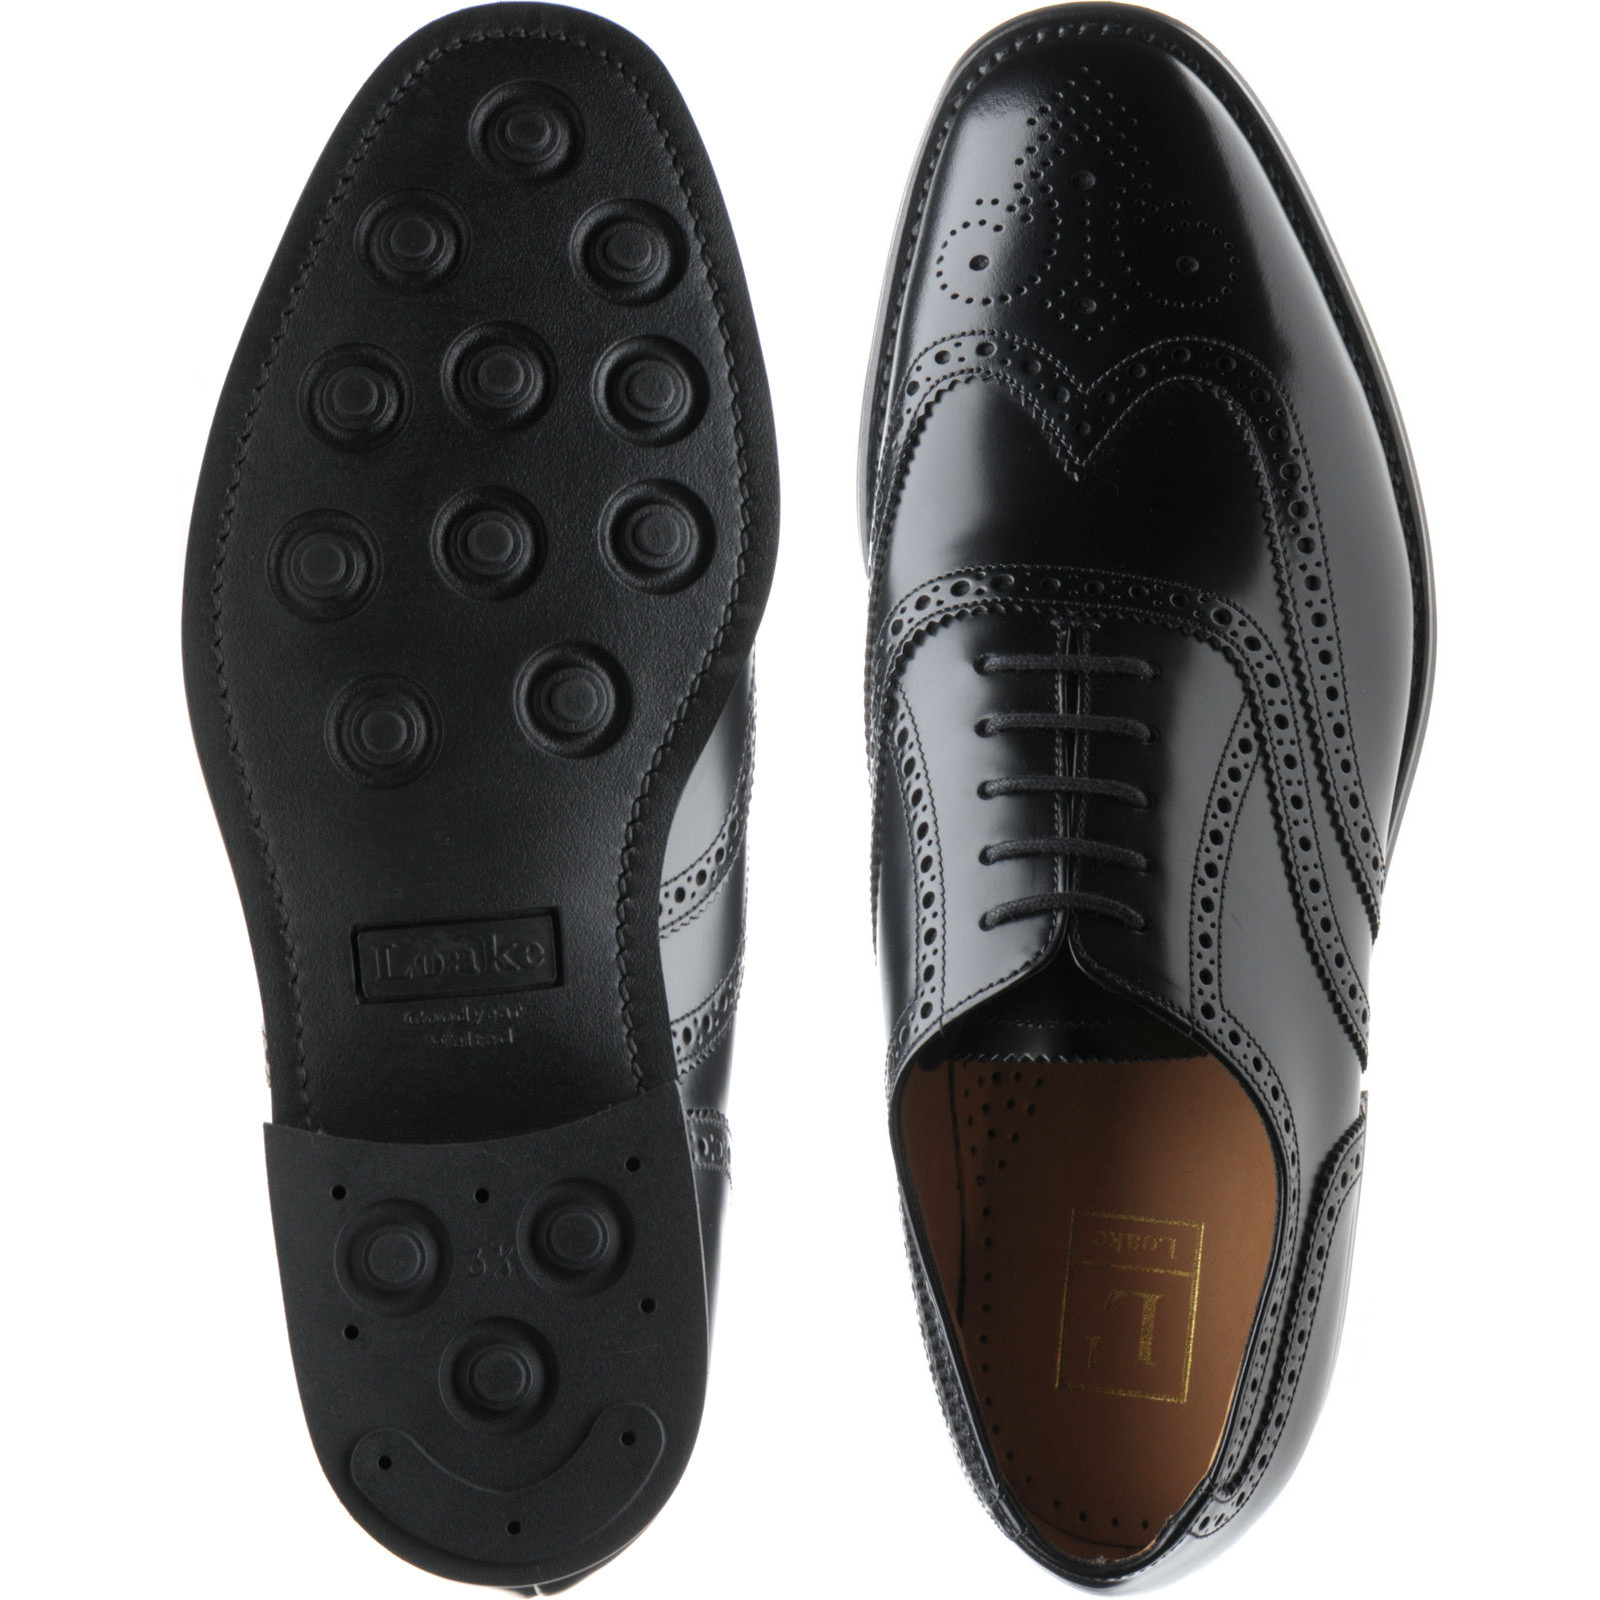 Loake shoes | Loake Professional | 302 in Black Polished at Herring Shoes